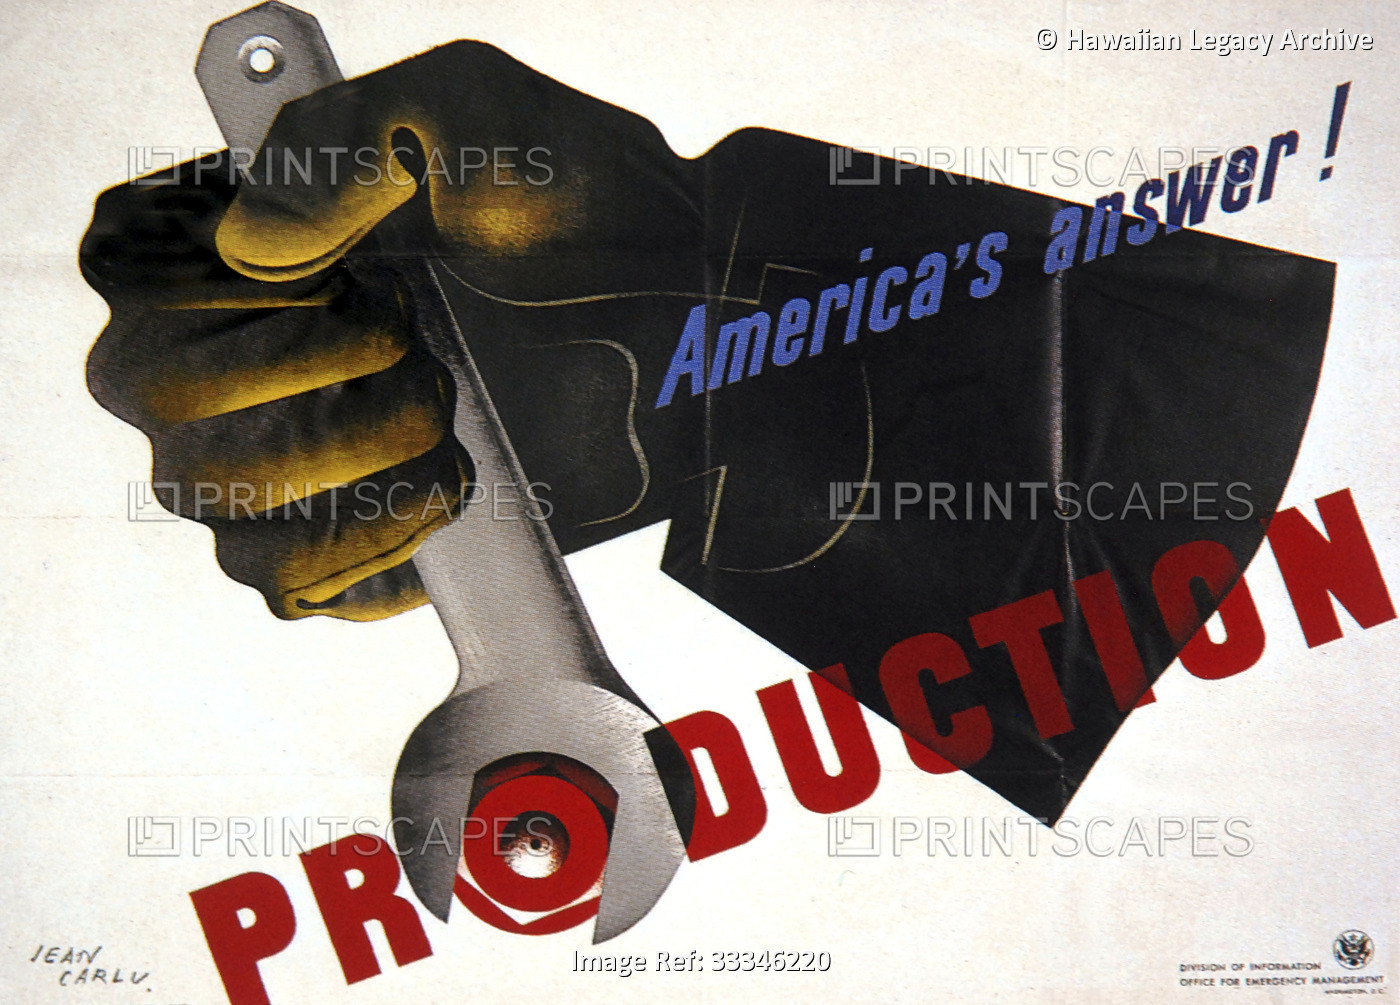 Advertising for trades work in America; Artwork